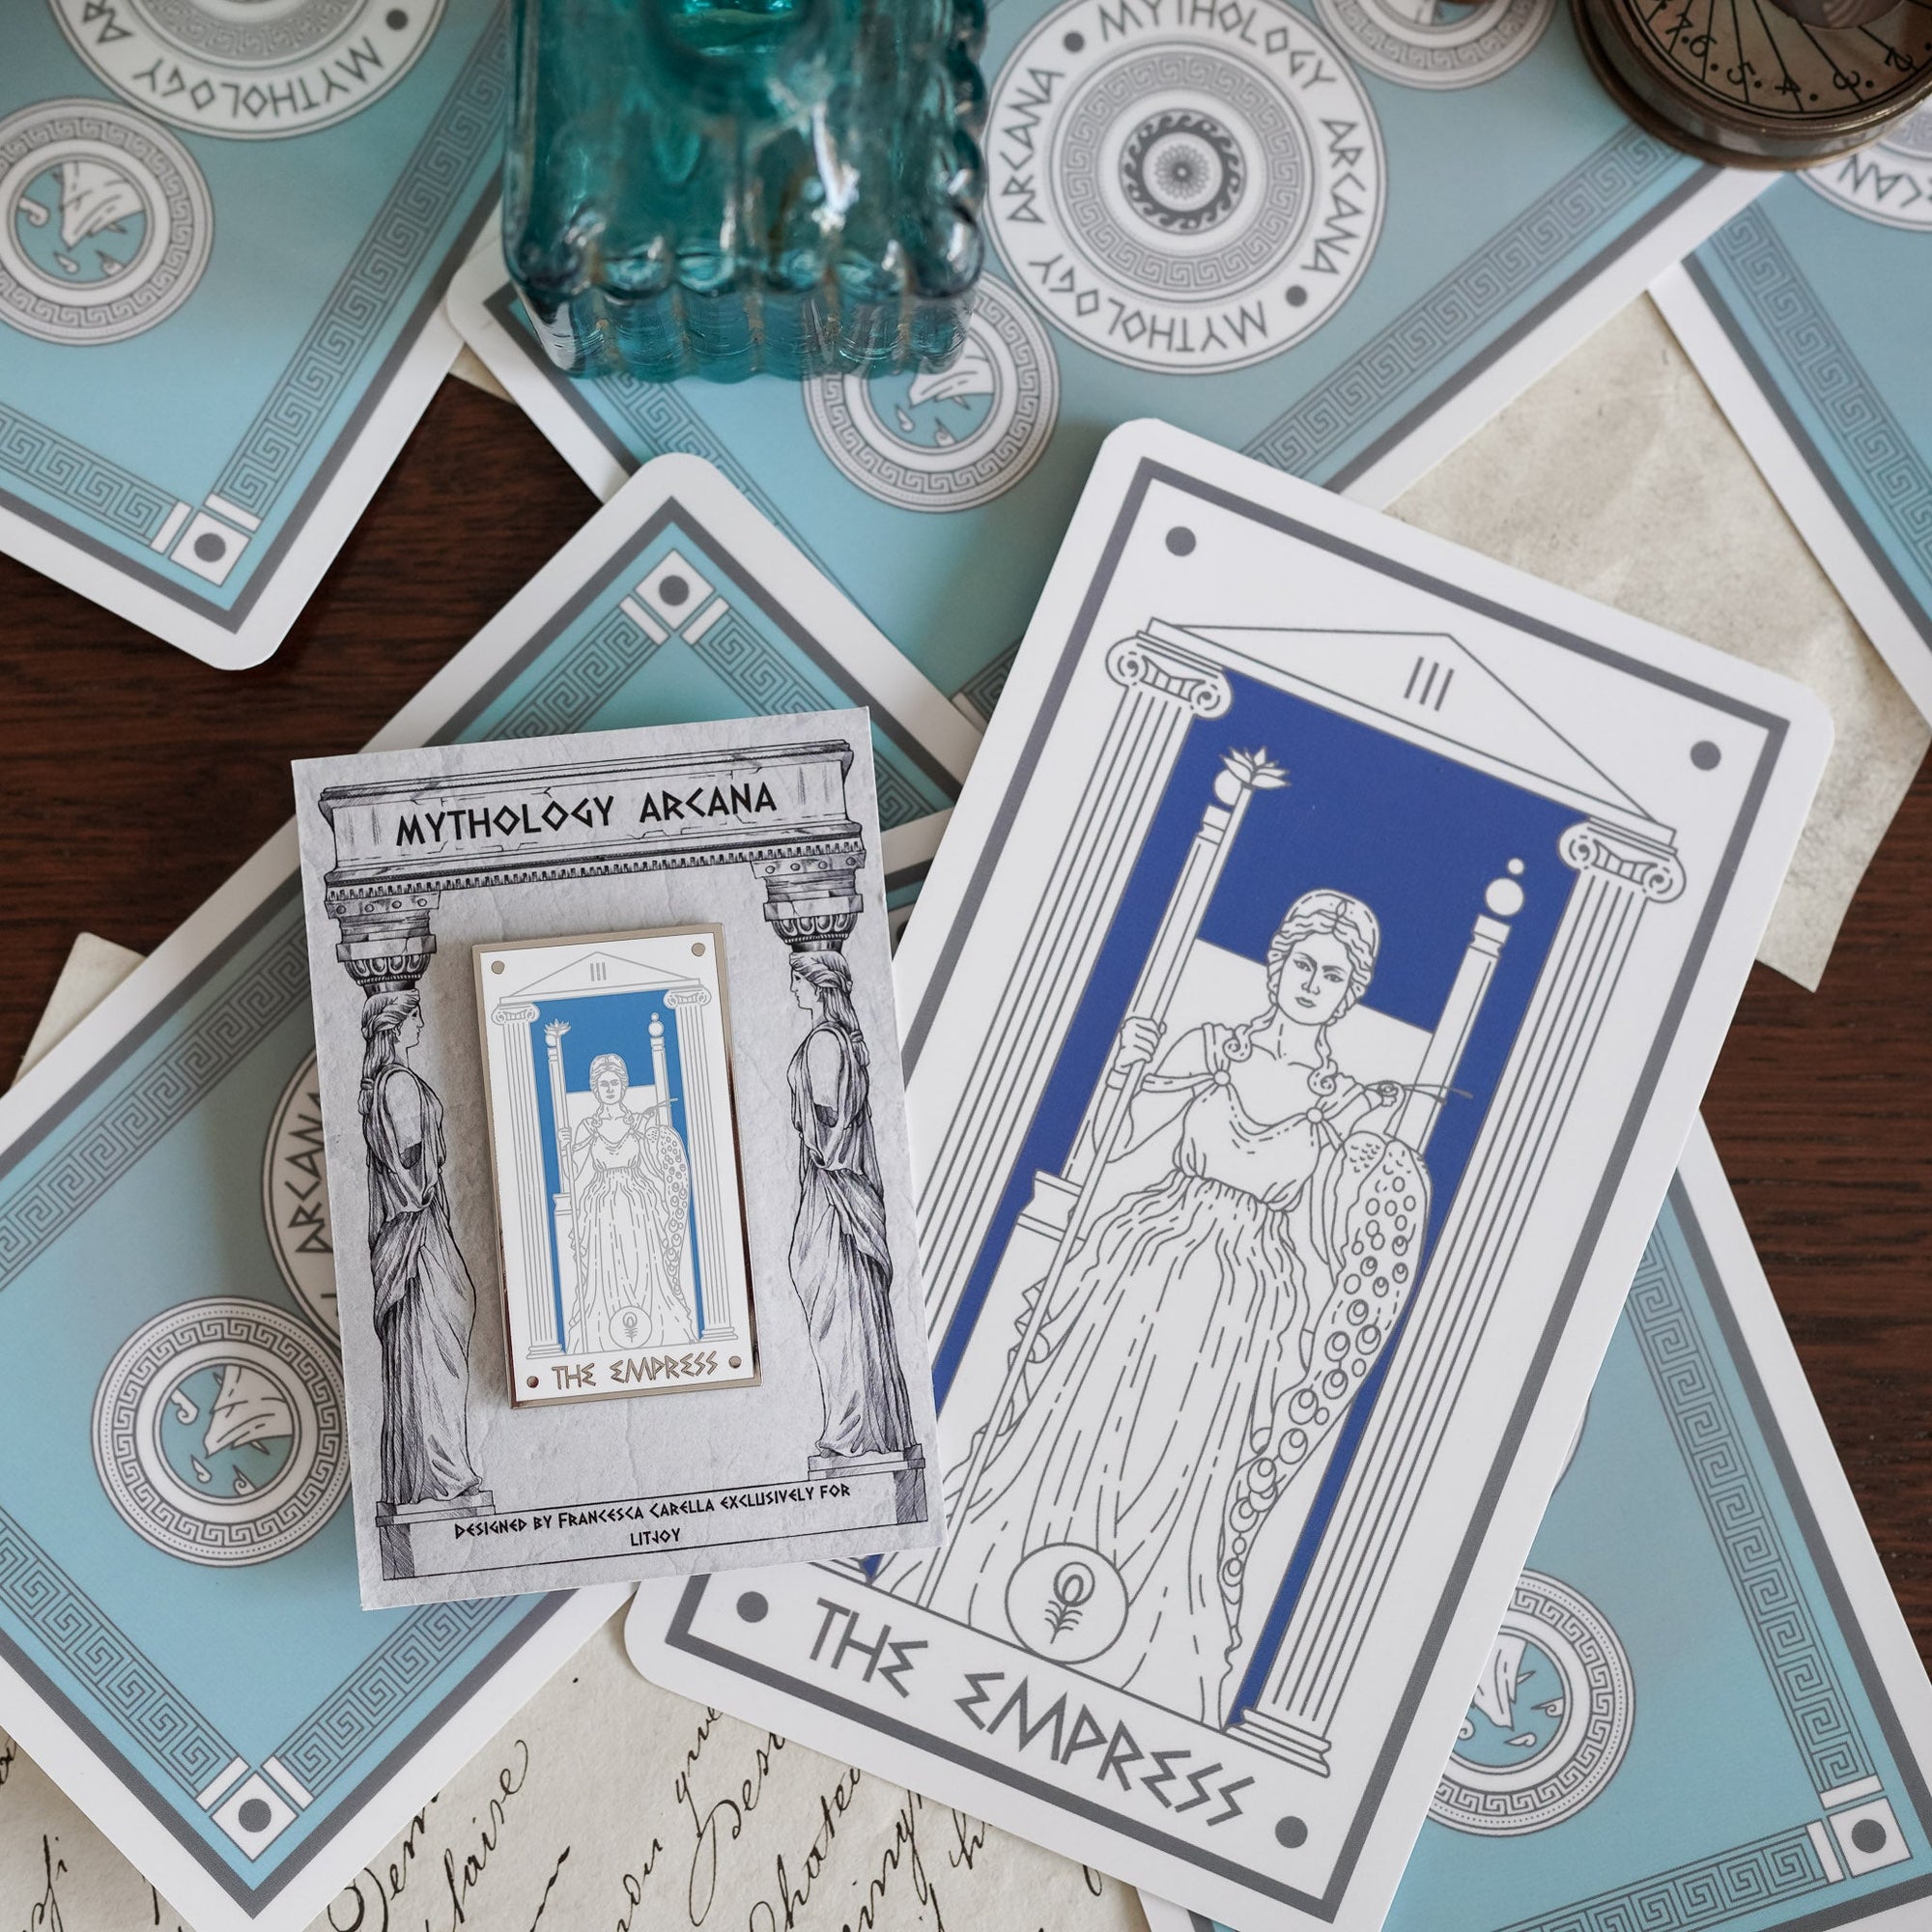 Hera The Empress, Mythology Tarot Enamel Pin with Hera sitting on a throne between two columns and words "The Empress” below.